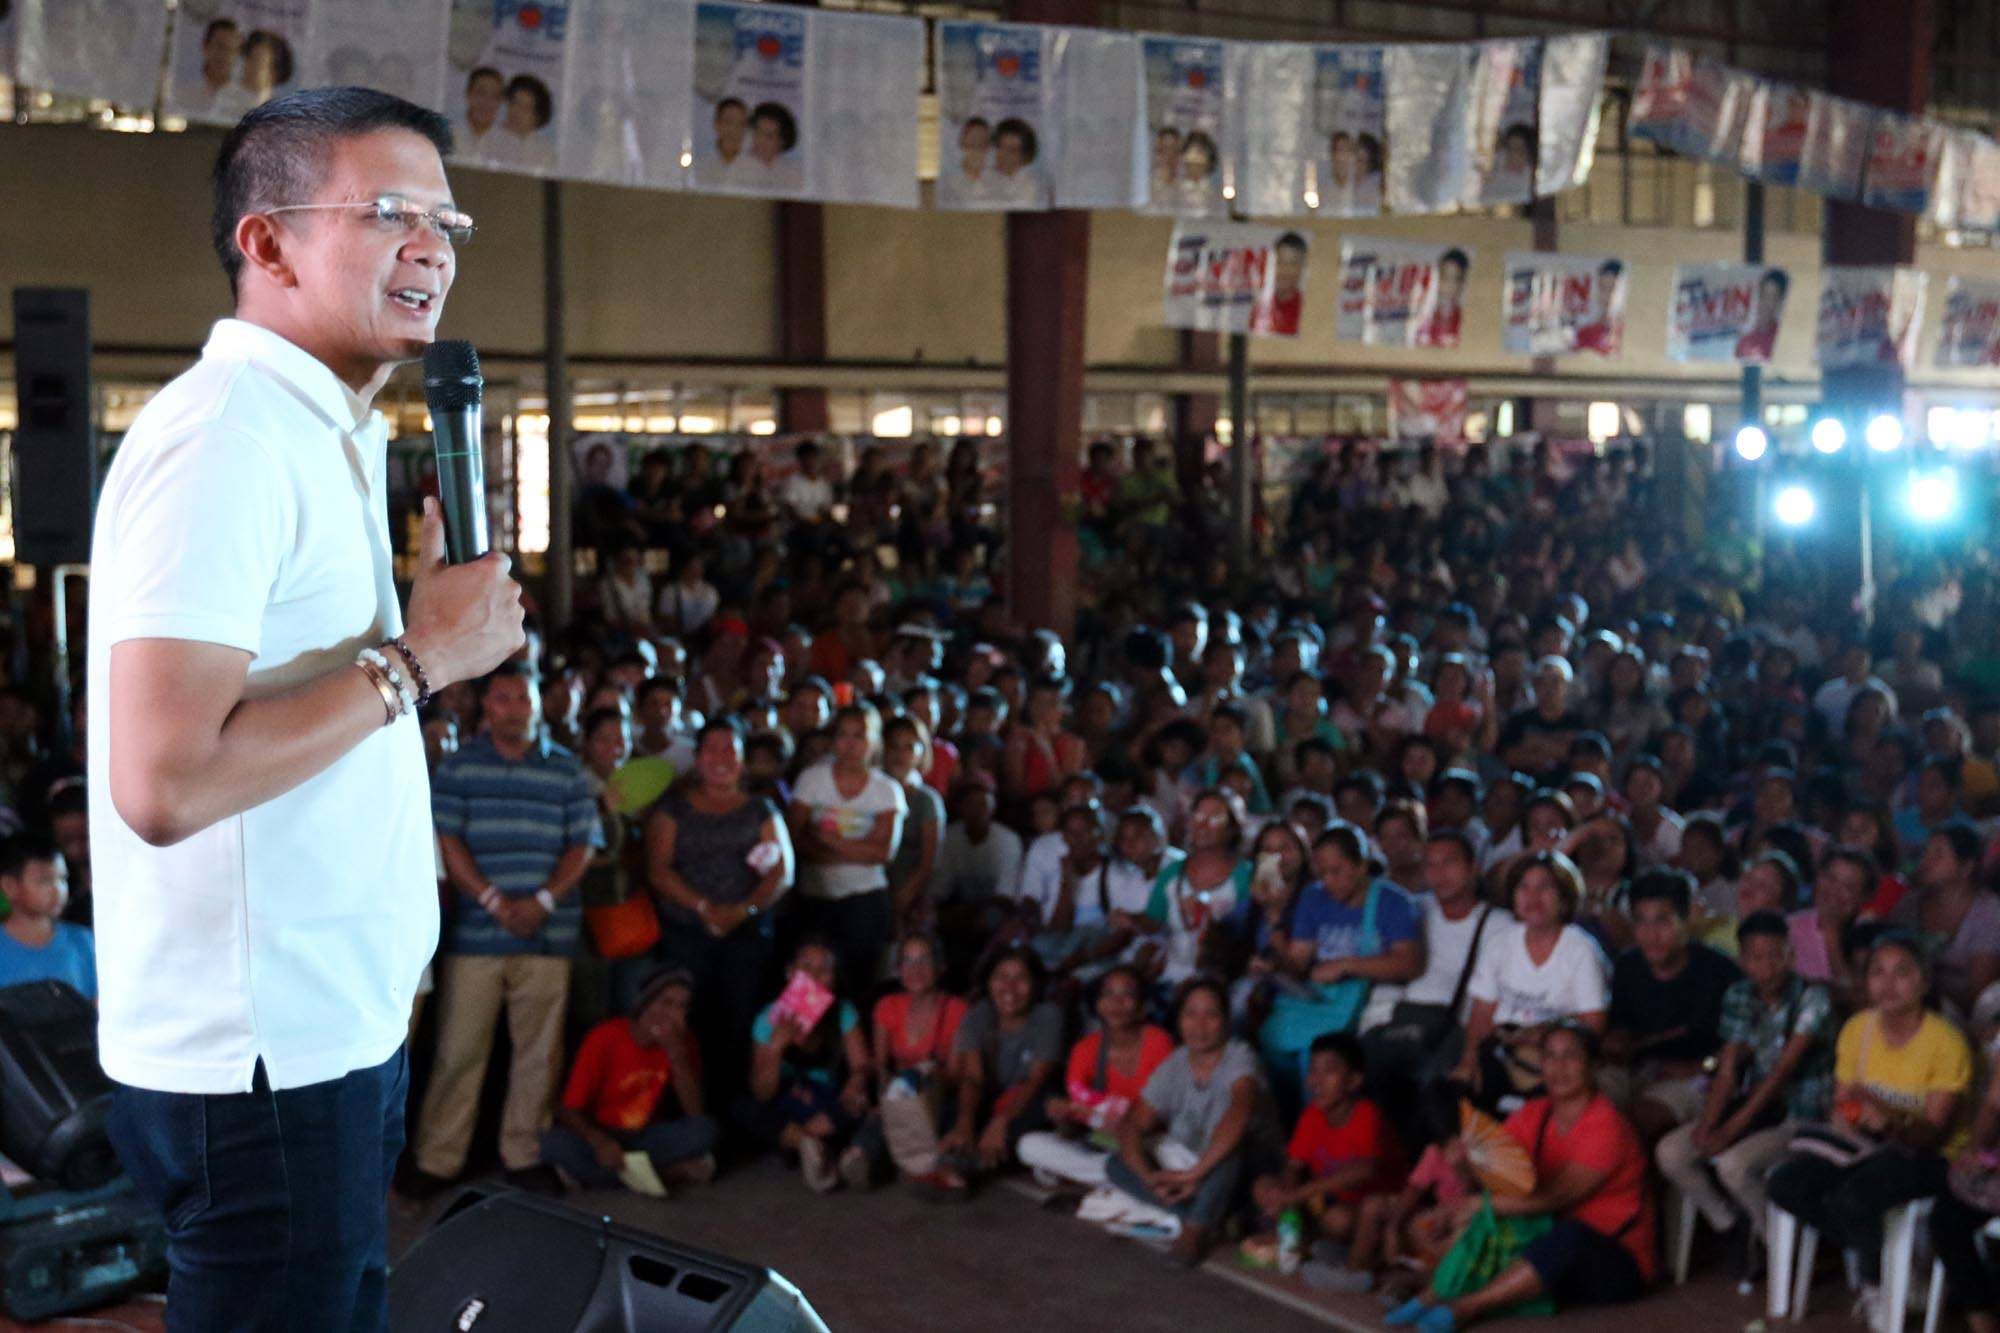 Chiz on VP debate: ‘What you see is what you get’